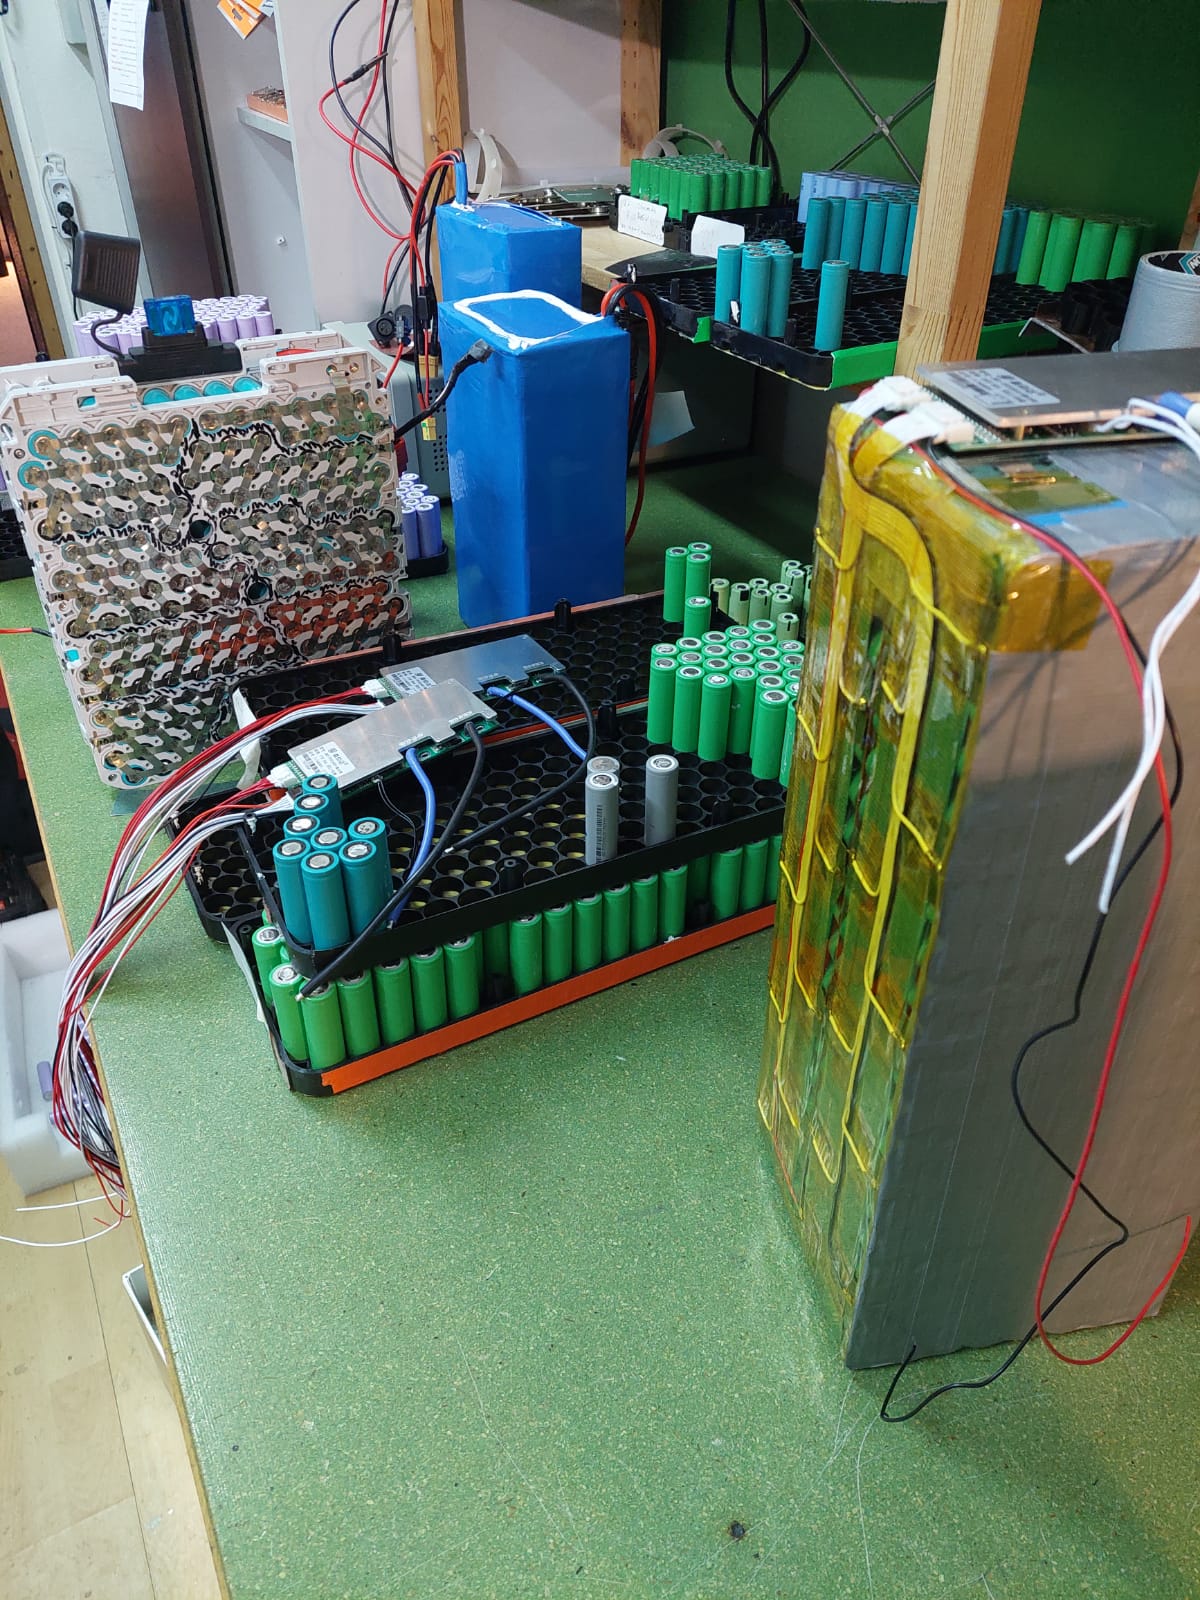 Lithium battery packs made to measure